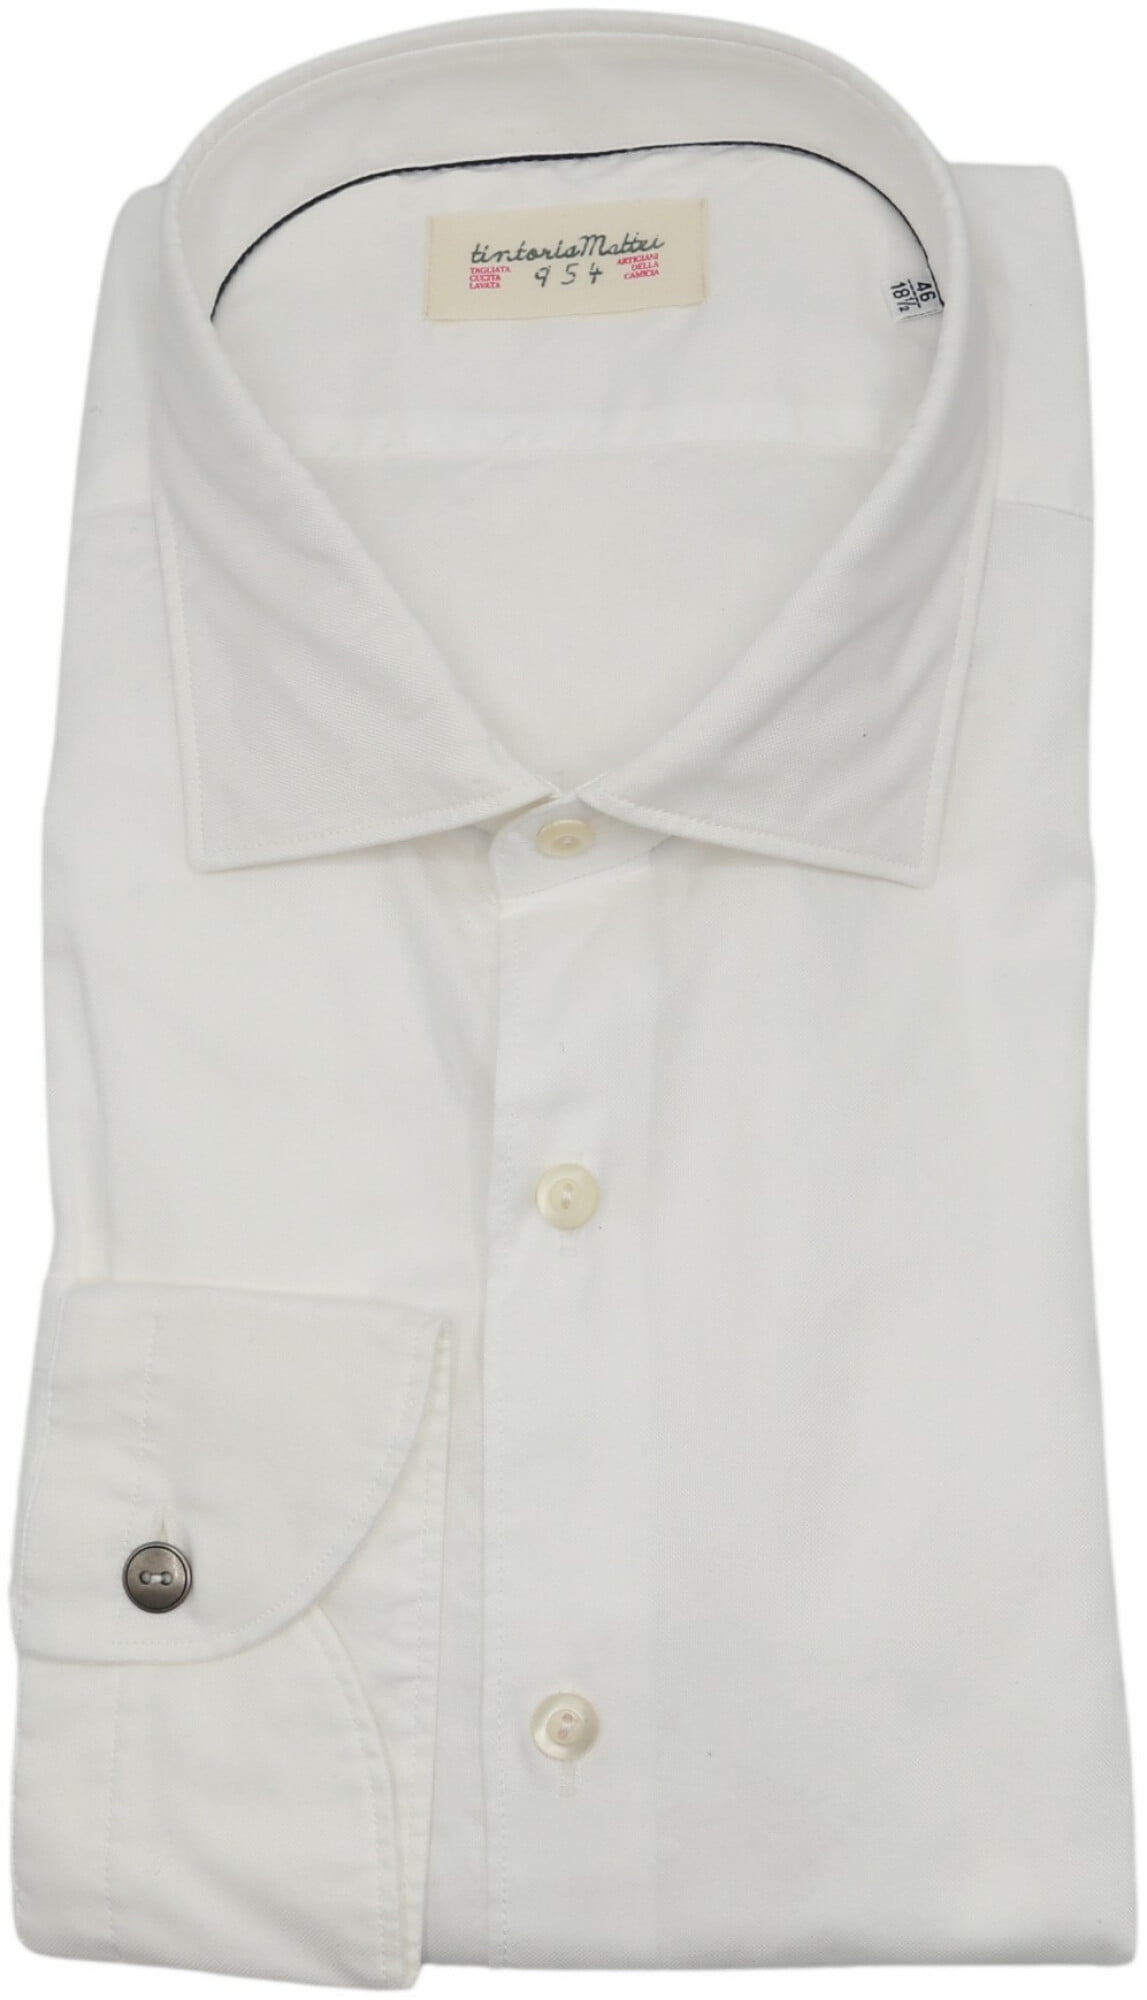 Tintoria Mattei 954 Cotton Shirt in Ivory White for Men Mens Clothing Shirts Casual shirts and button-up shirts 